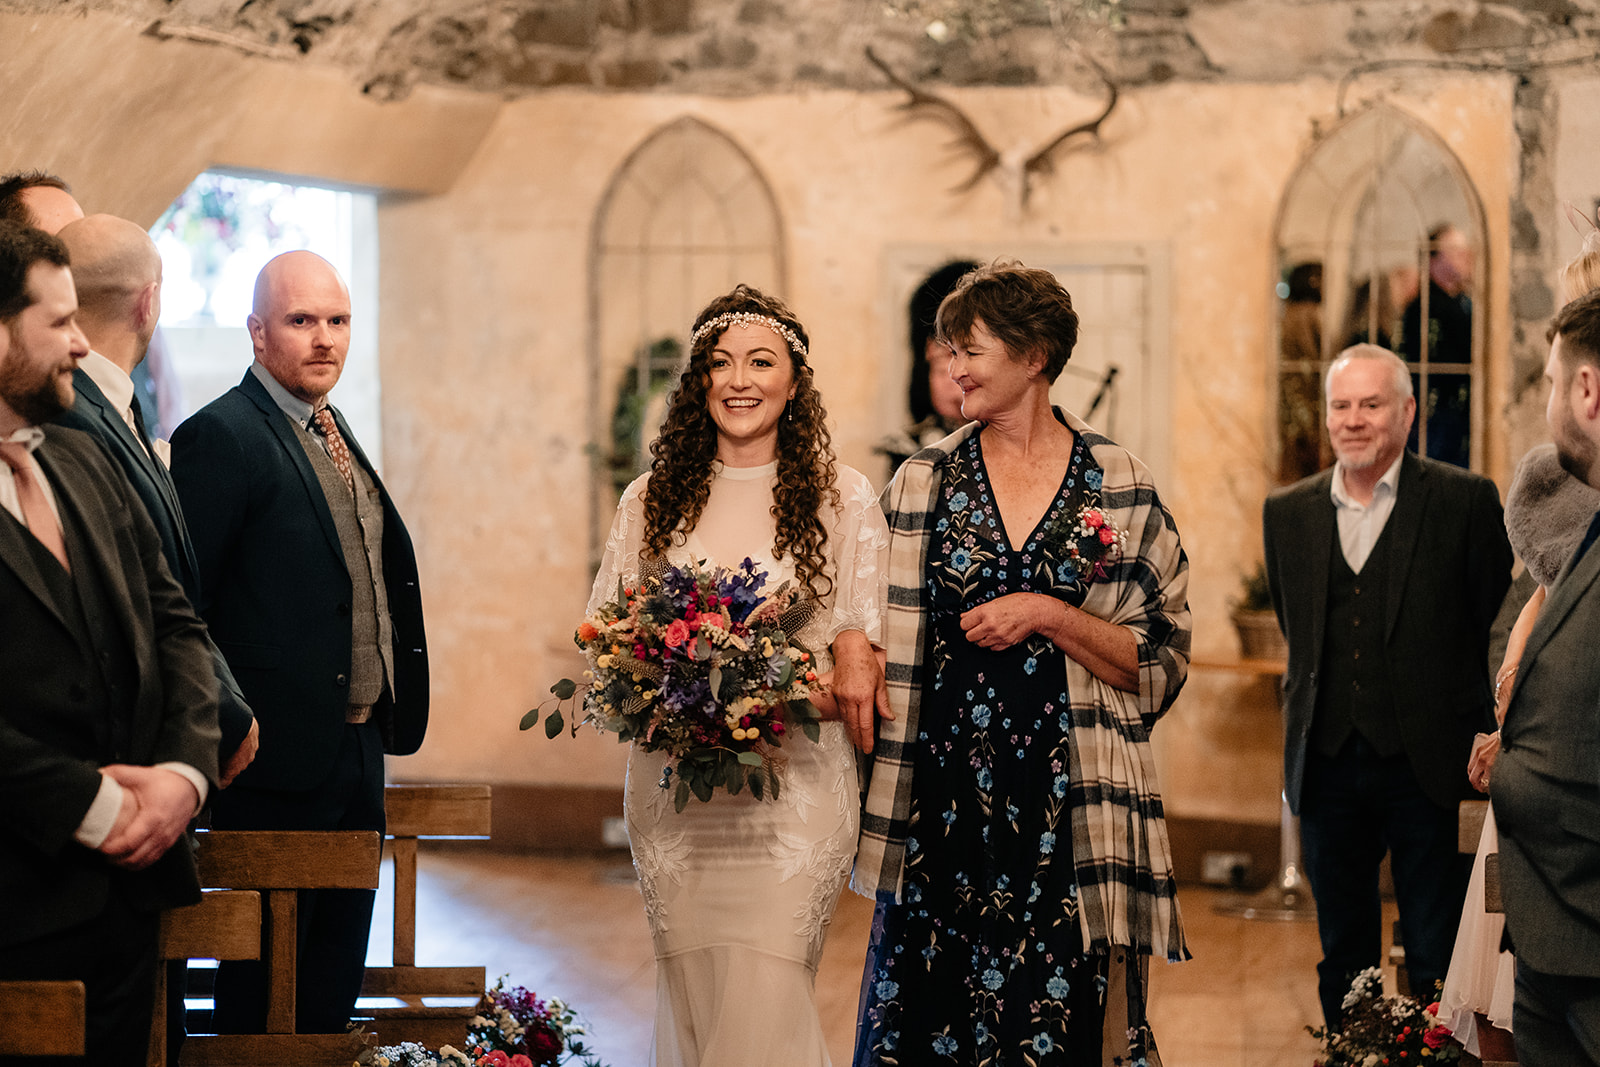 A bride making her entrance to the wedding ceremony at Neidpath castle.